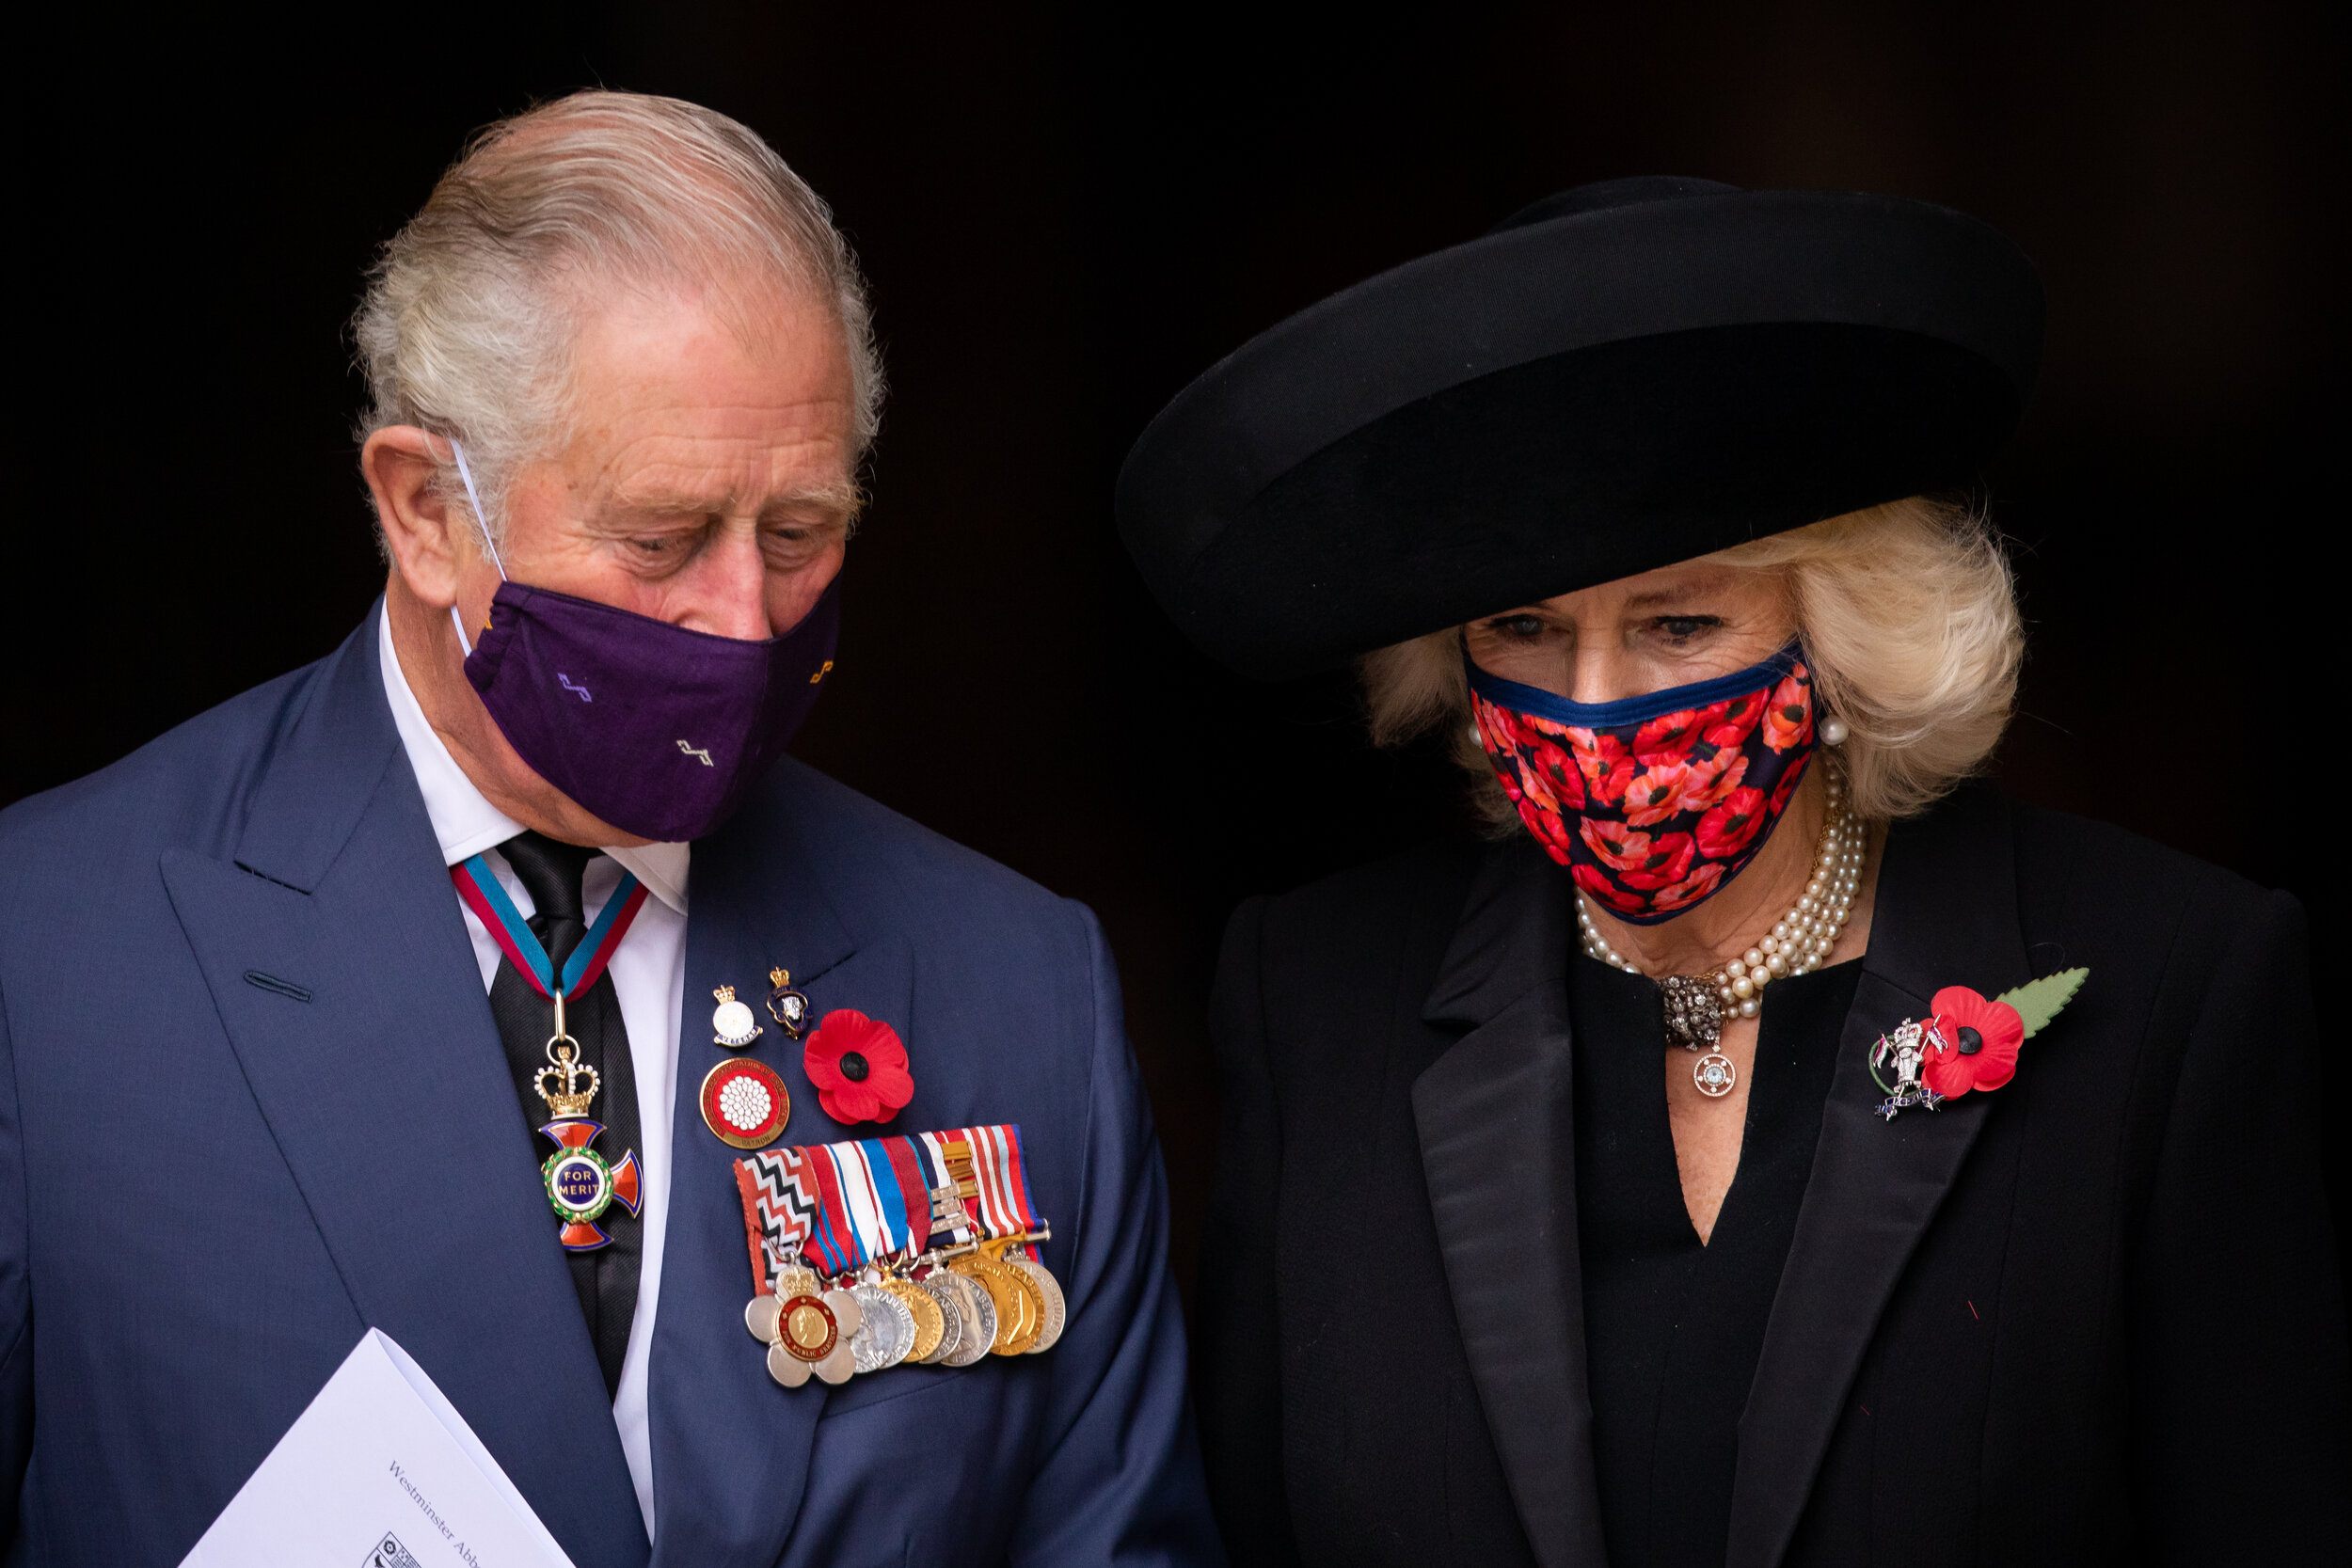  The Prince of Wales and the Duchess of Cornwall attending an service on Armistice Day to mark the centenary of the burial of the unknown warrior in Westminster Abbey, London. Picture by: Aaron Chown/PA Images. Date taken: 11-Nov-2020 